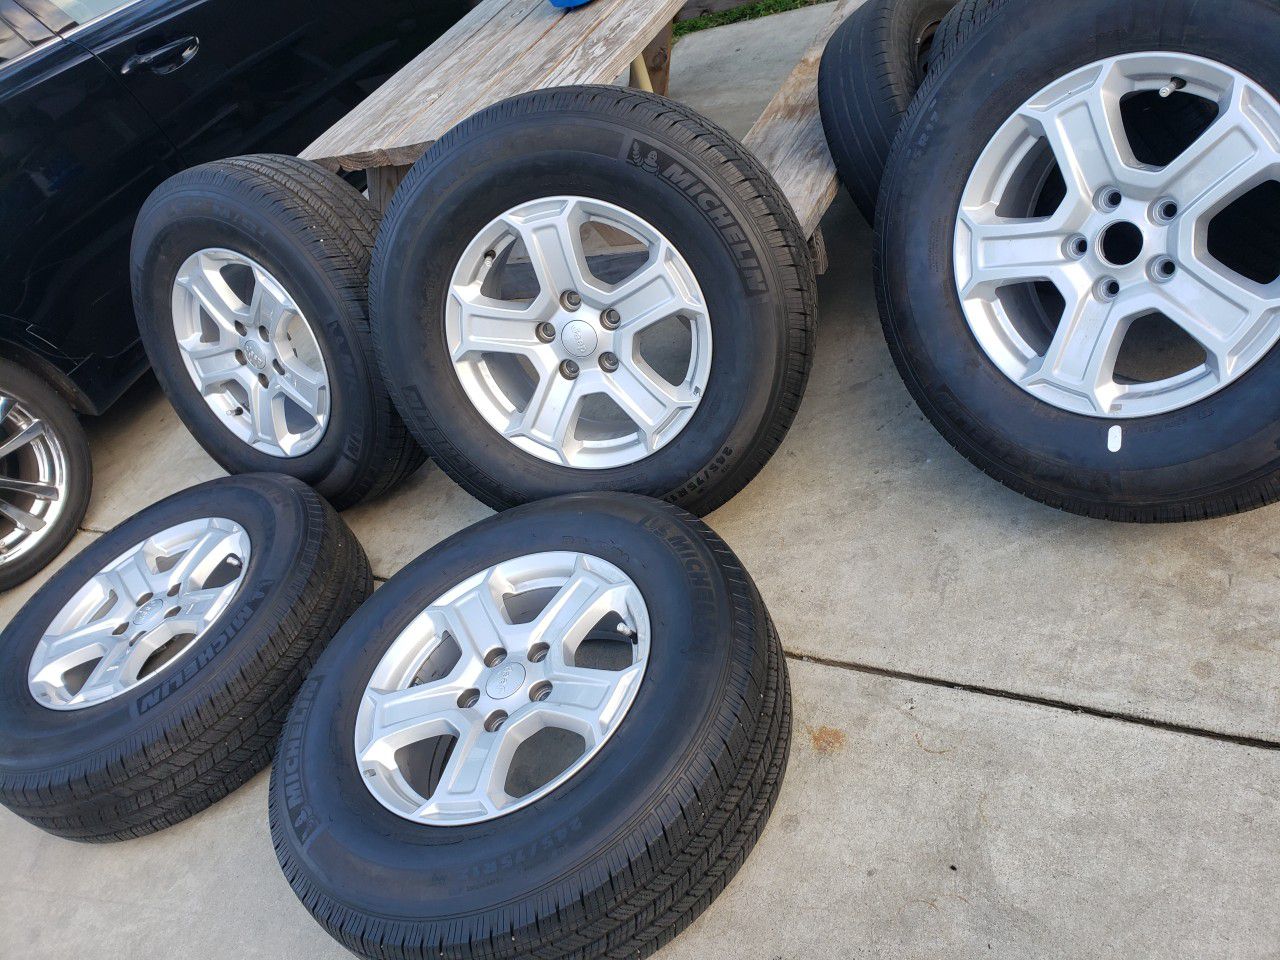 5×JEEP 17"INCH RIM'S WITH 245/75/17 MICHELIN TIRES 90%